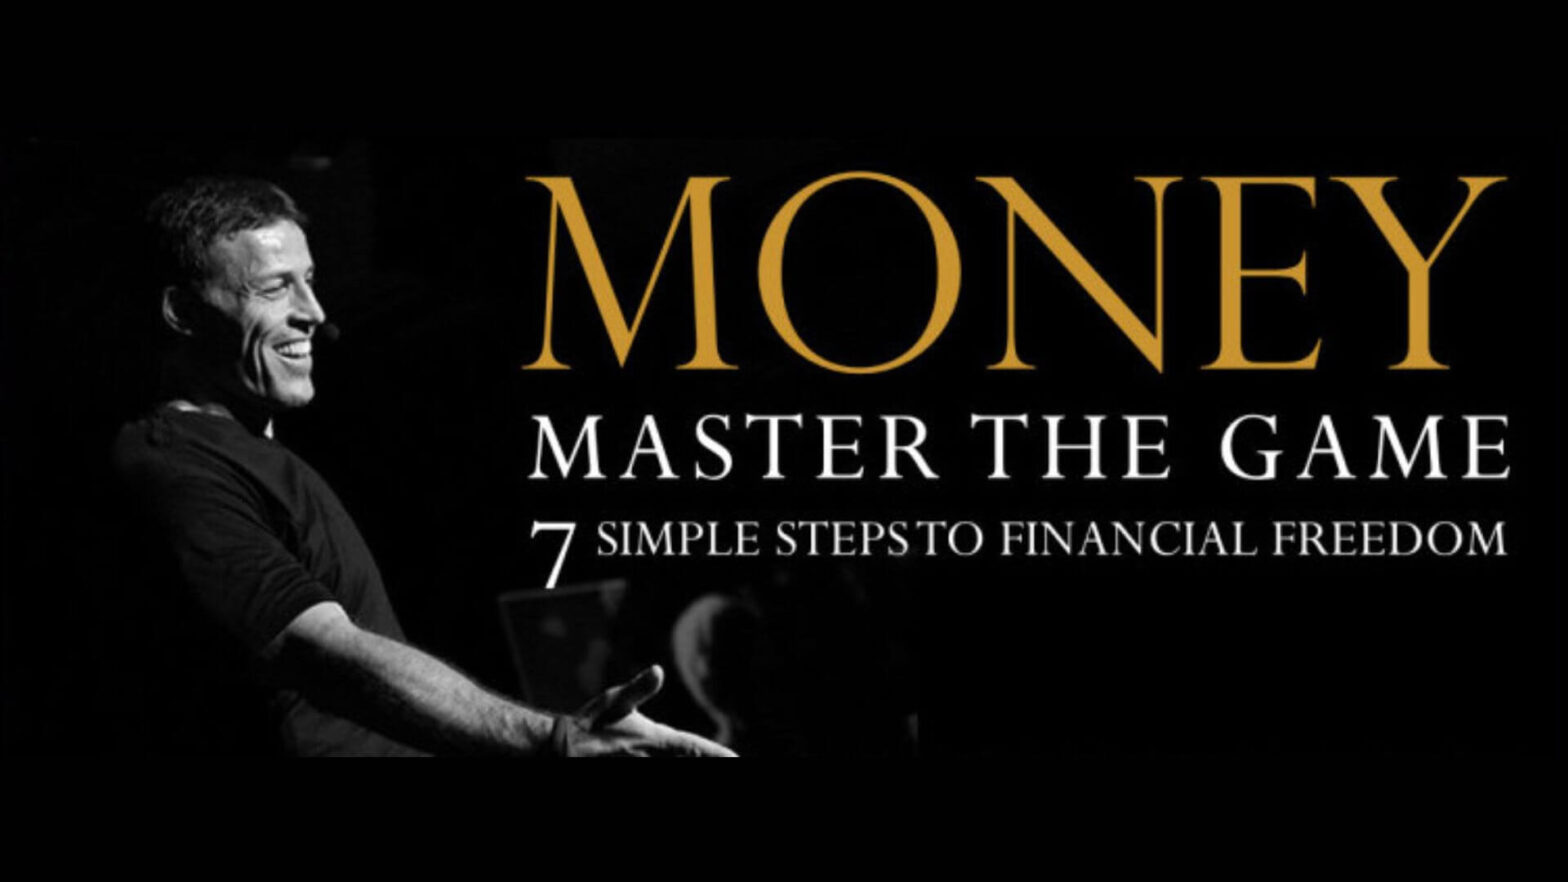 Money, Master the Game, By Tony Robbins: Book Review